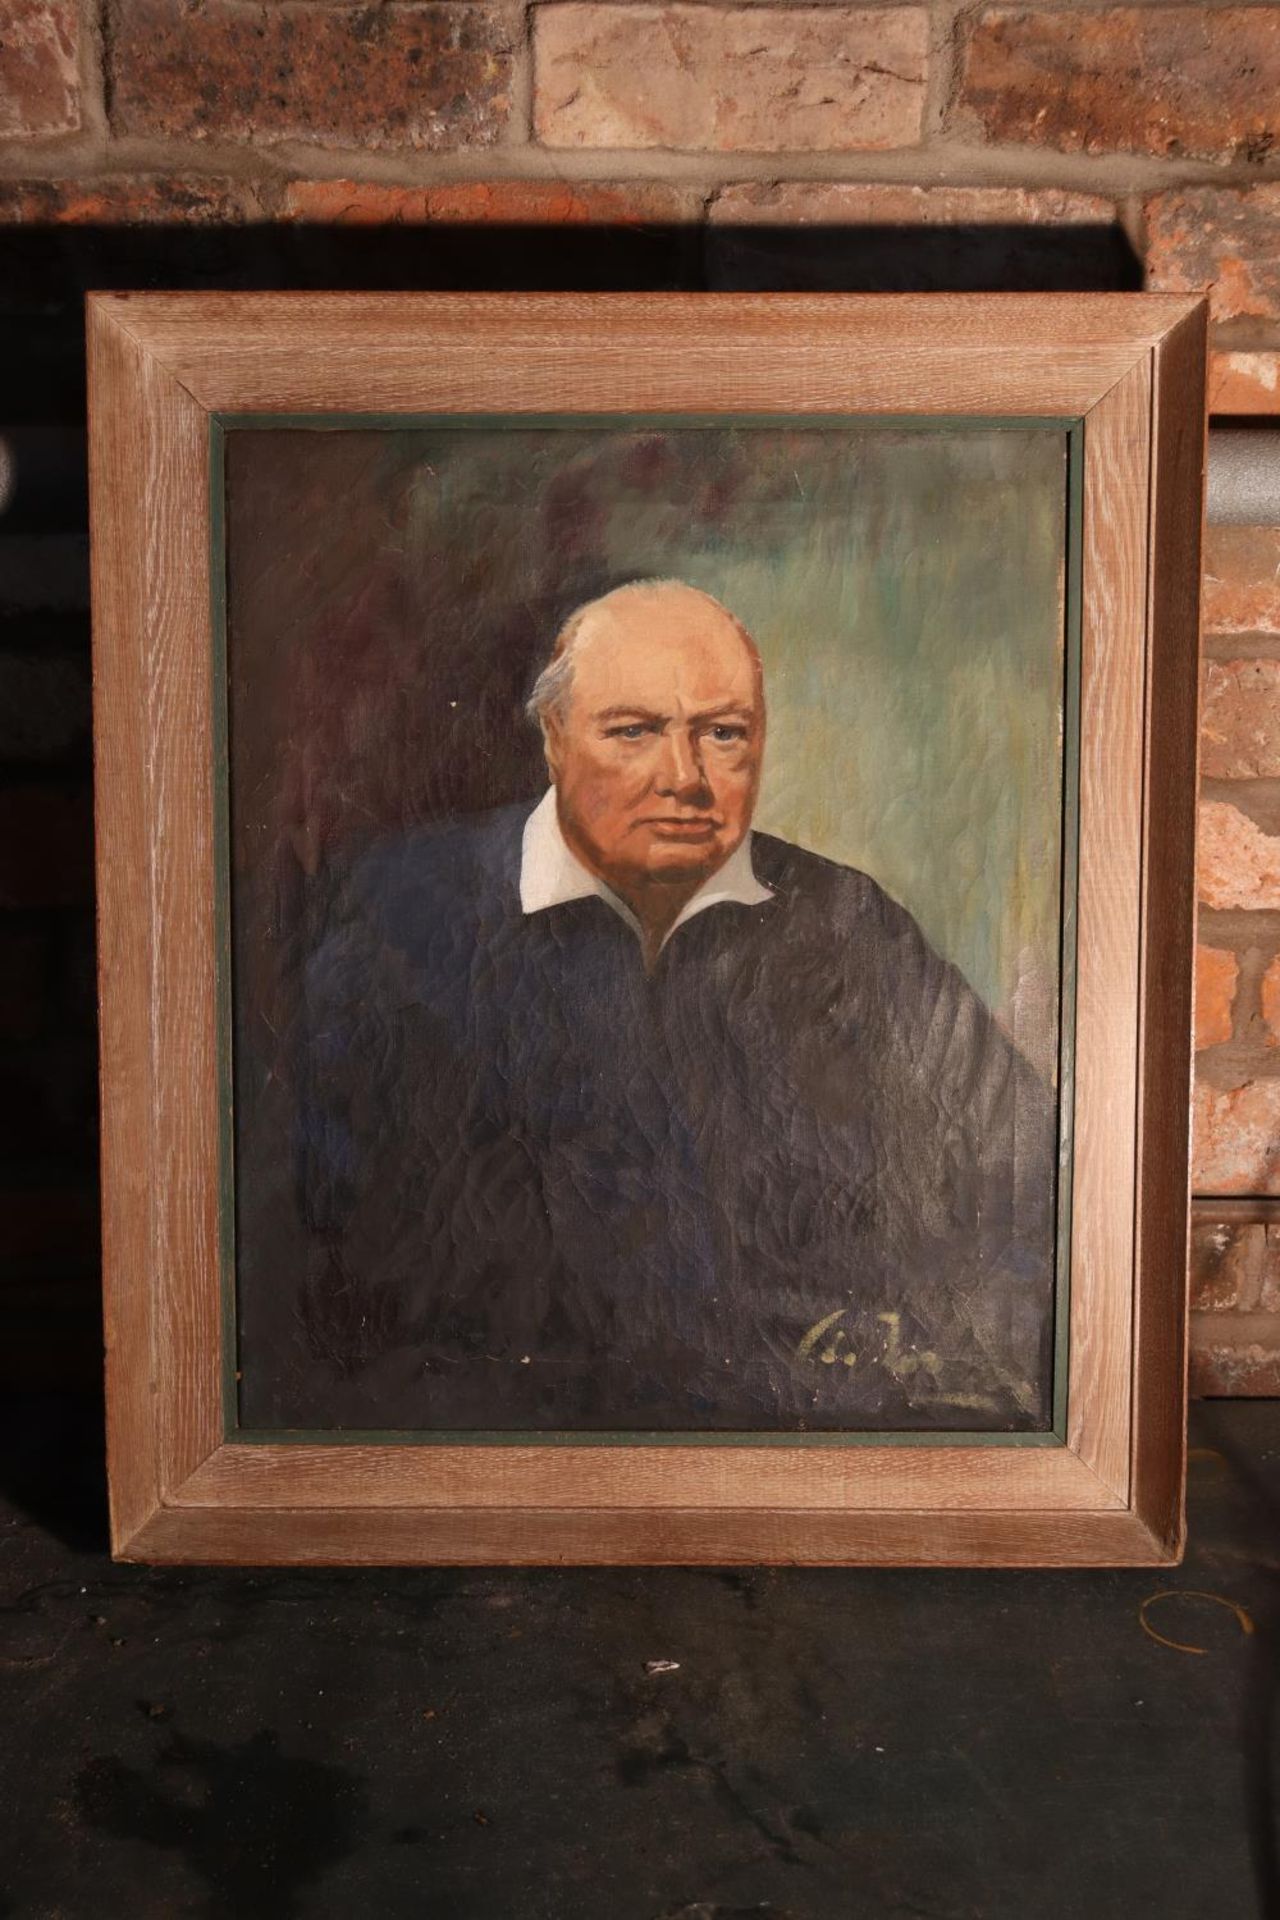 A FRAMED OIL ON CANVAS OF WINSTON CHURCHILL WITH INDISTINCT SIGNATURE, 59CM X 68CM